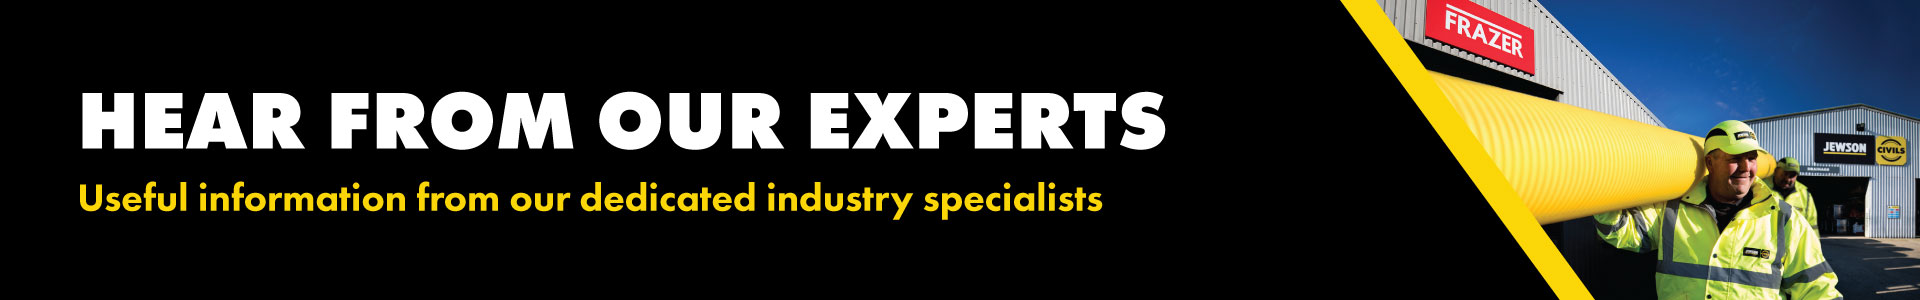 Information from our dedicated experts